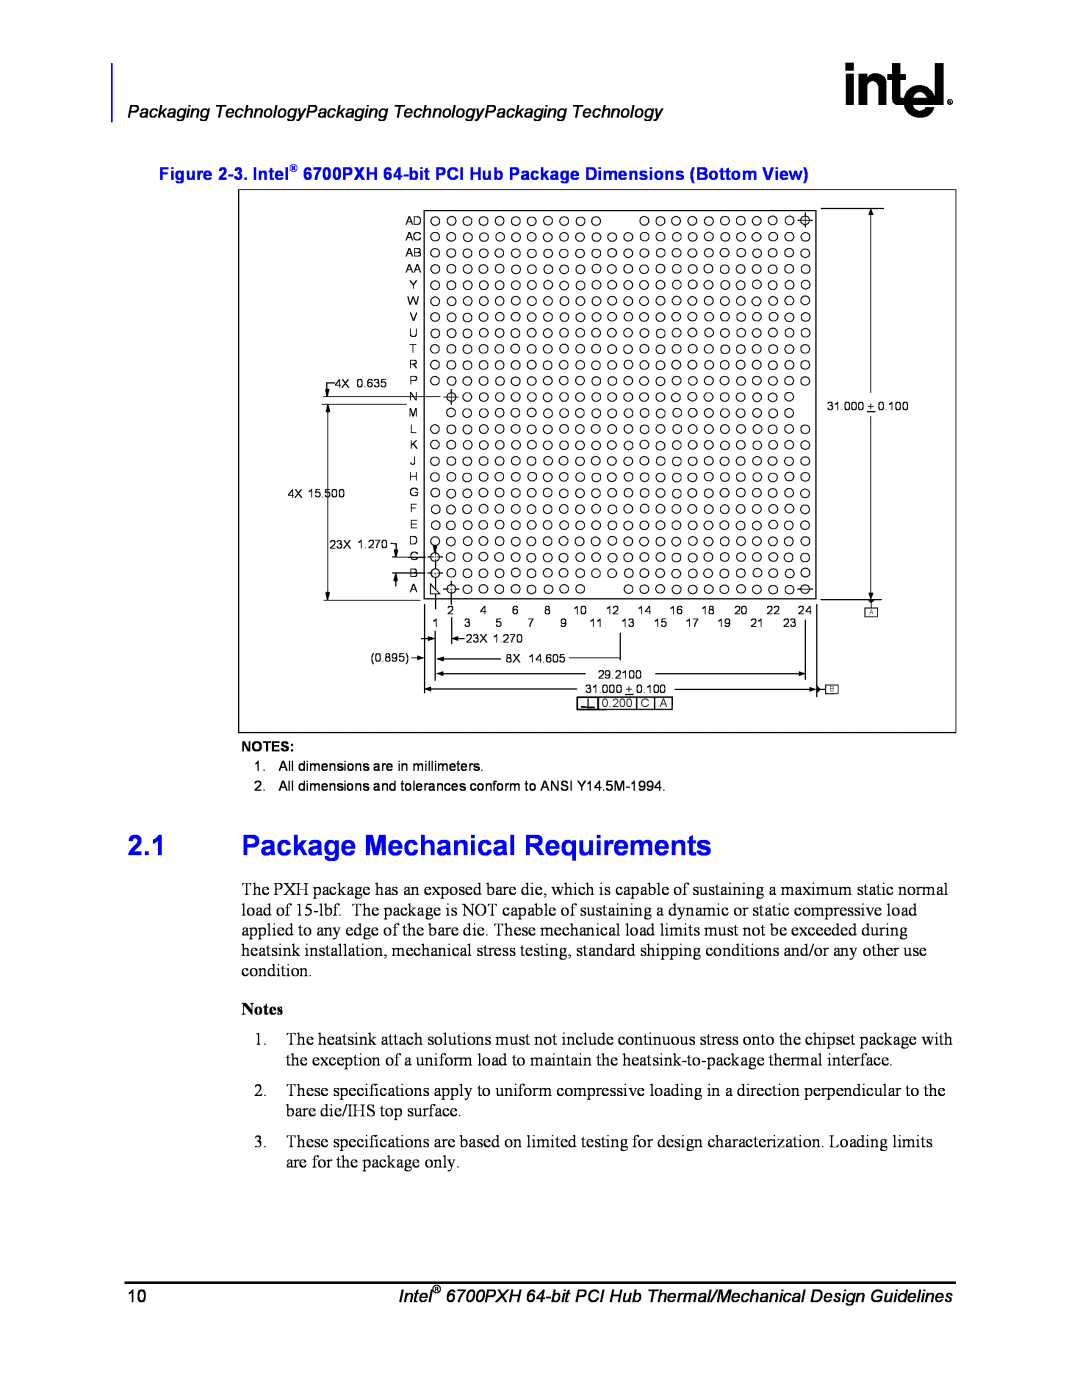 Intel 6700PXH manual Package Mechanical Requirements, Packaging TechnologyPackaging TechnologyPackaging Technology 